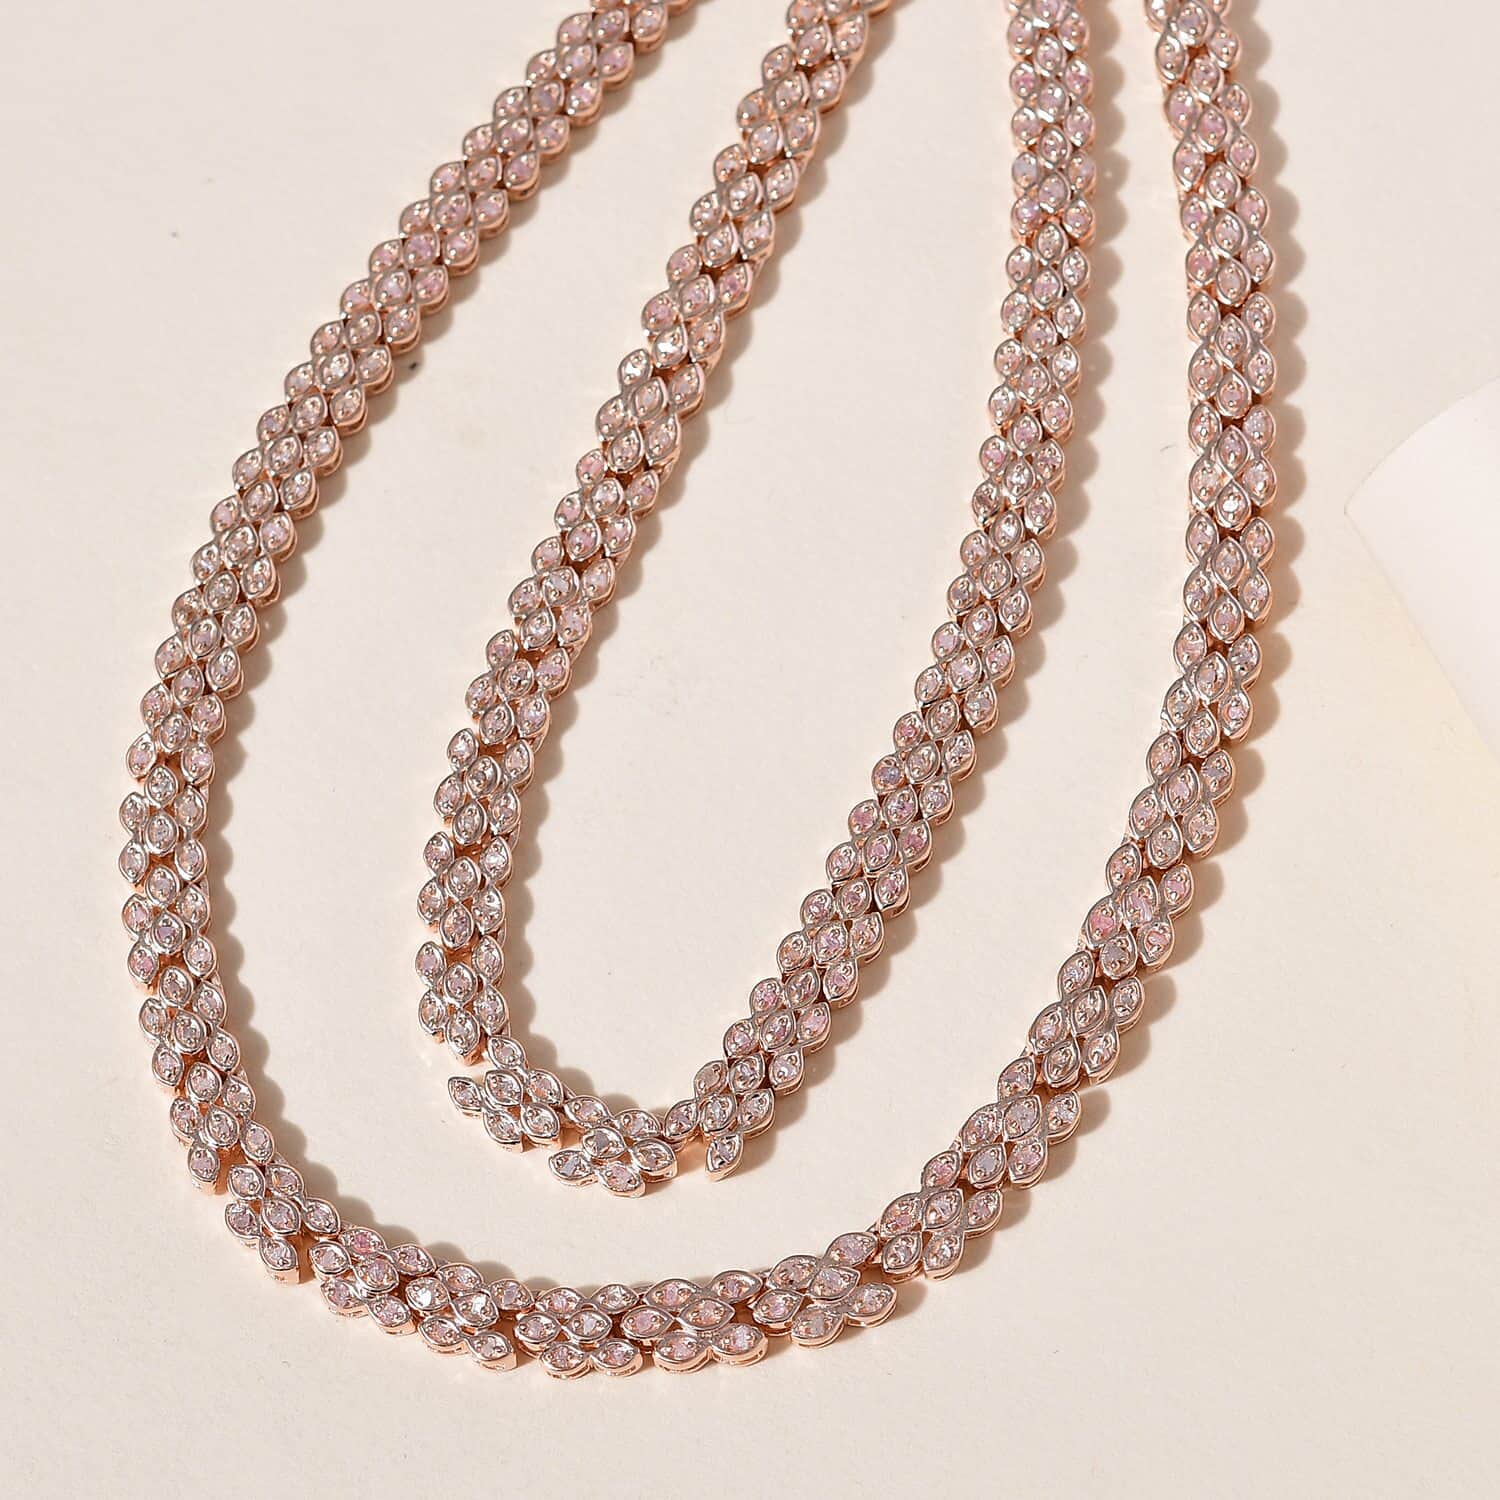 Buy Uncut Natural Pink Diamond Necklace 20 Inches in Vermeil Rose 